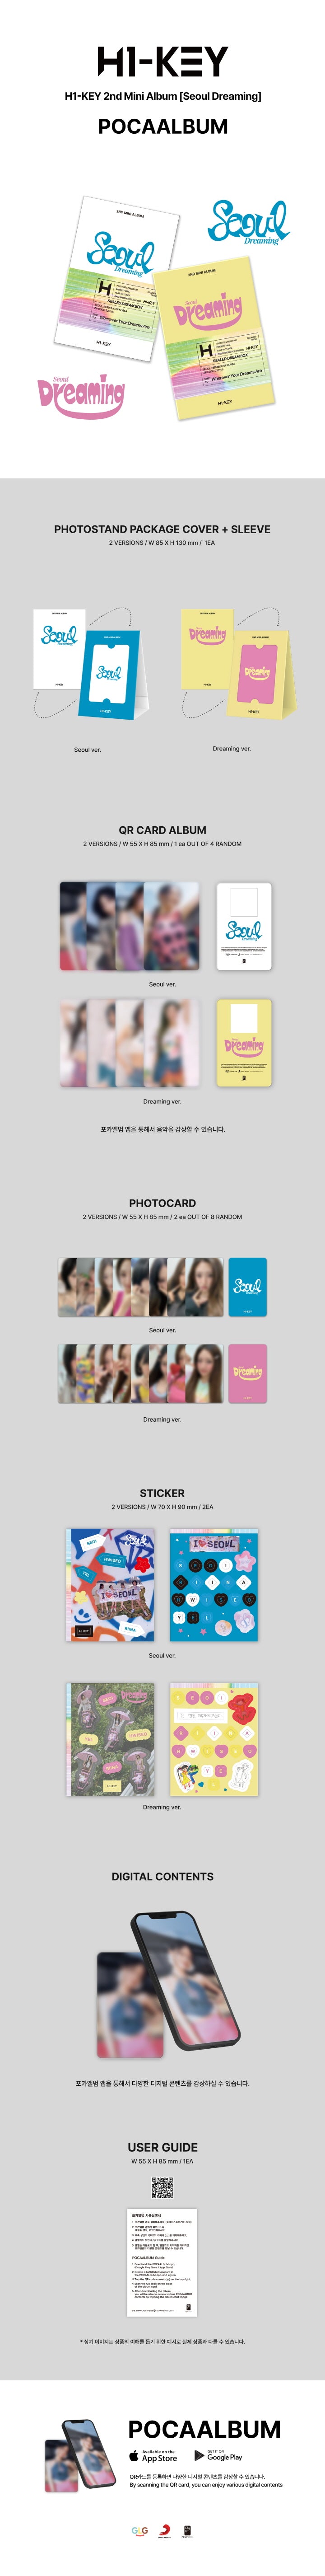 1 QR Card Album (random out of 4 types)
1 Photostand Package Cover + Sleeve
2 Photo Cards (random out of 8 types)
2 Stickers